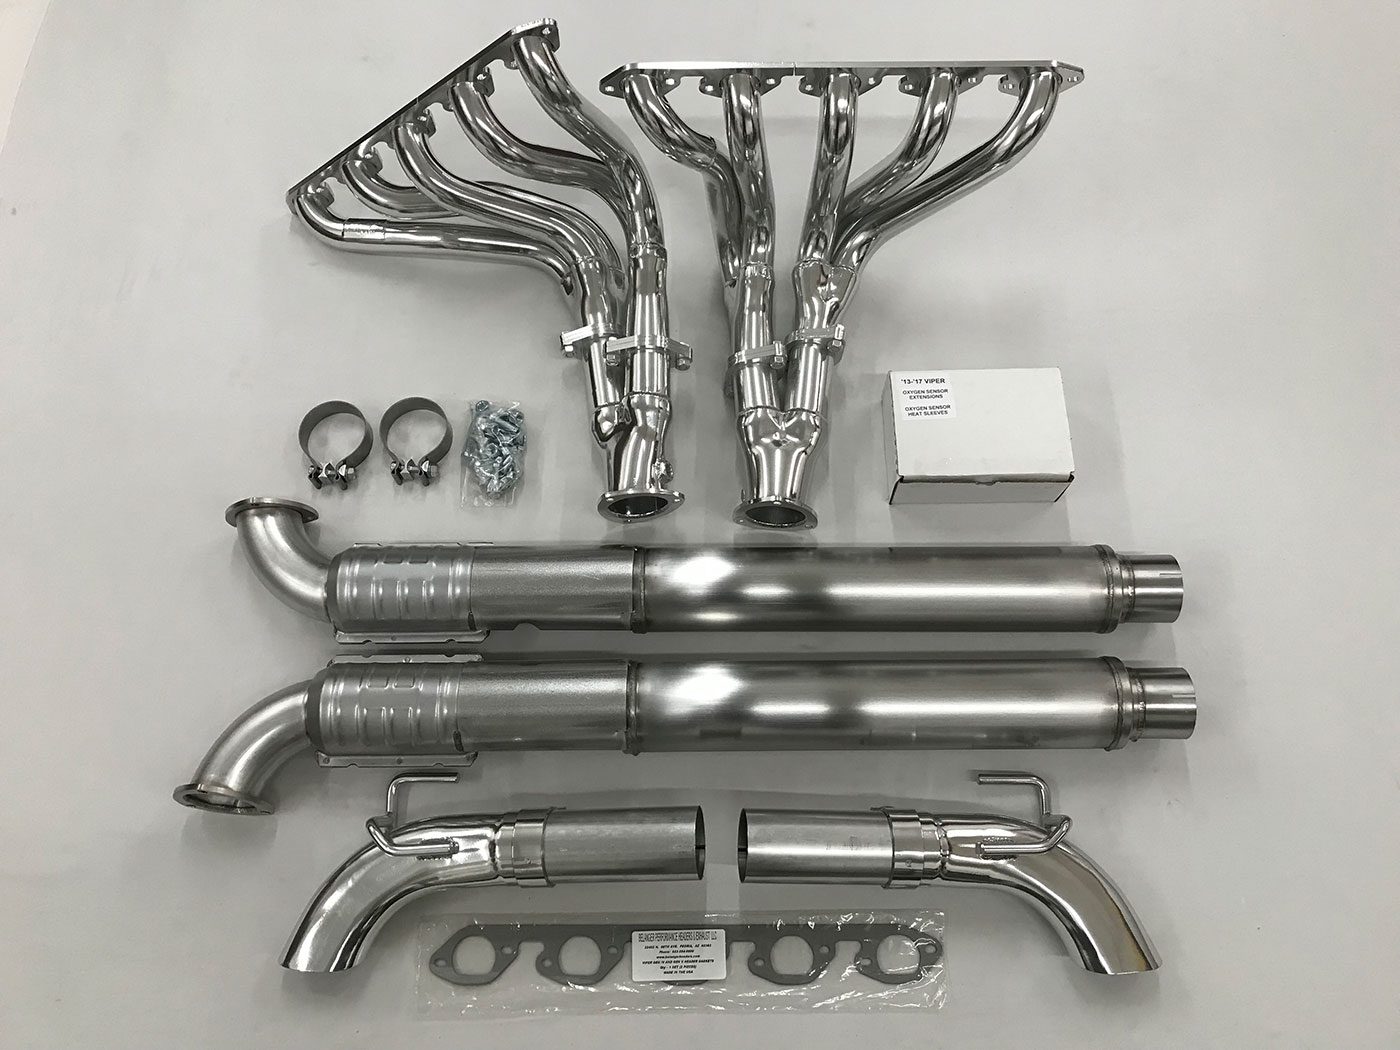 A set of exhaust pipes and headers for a car.